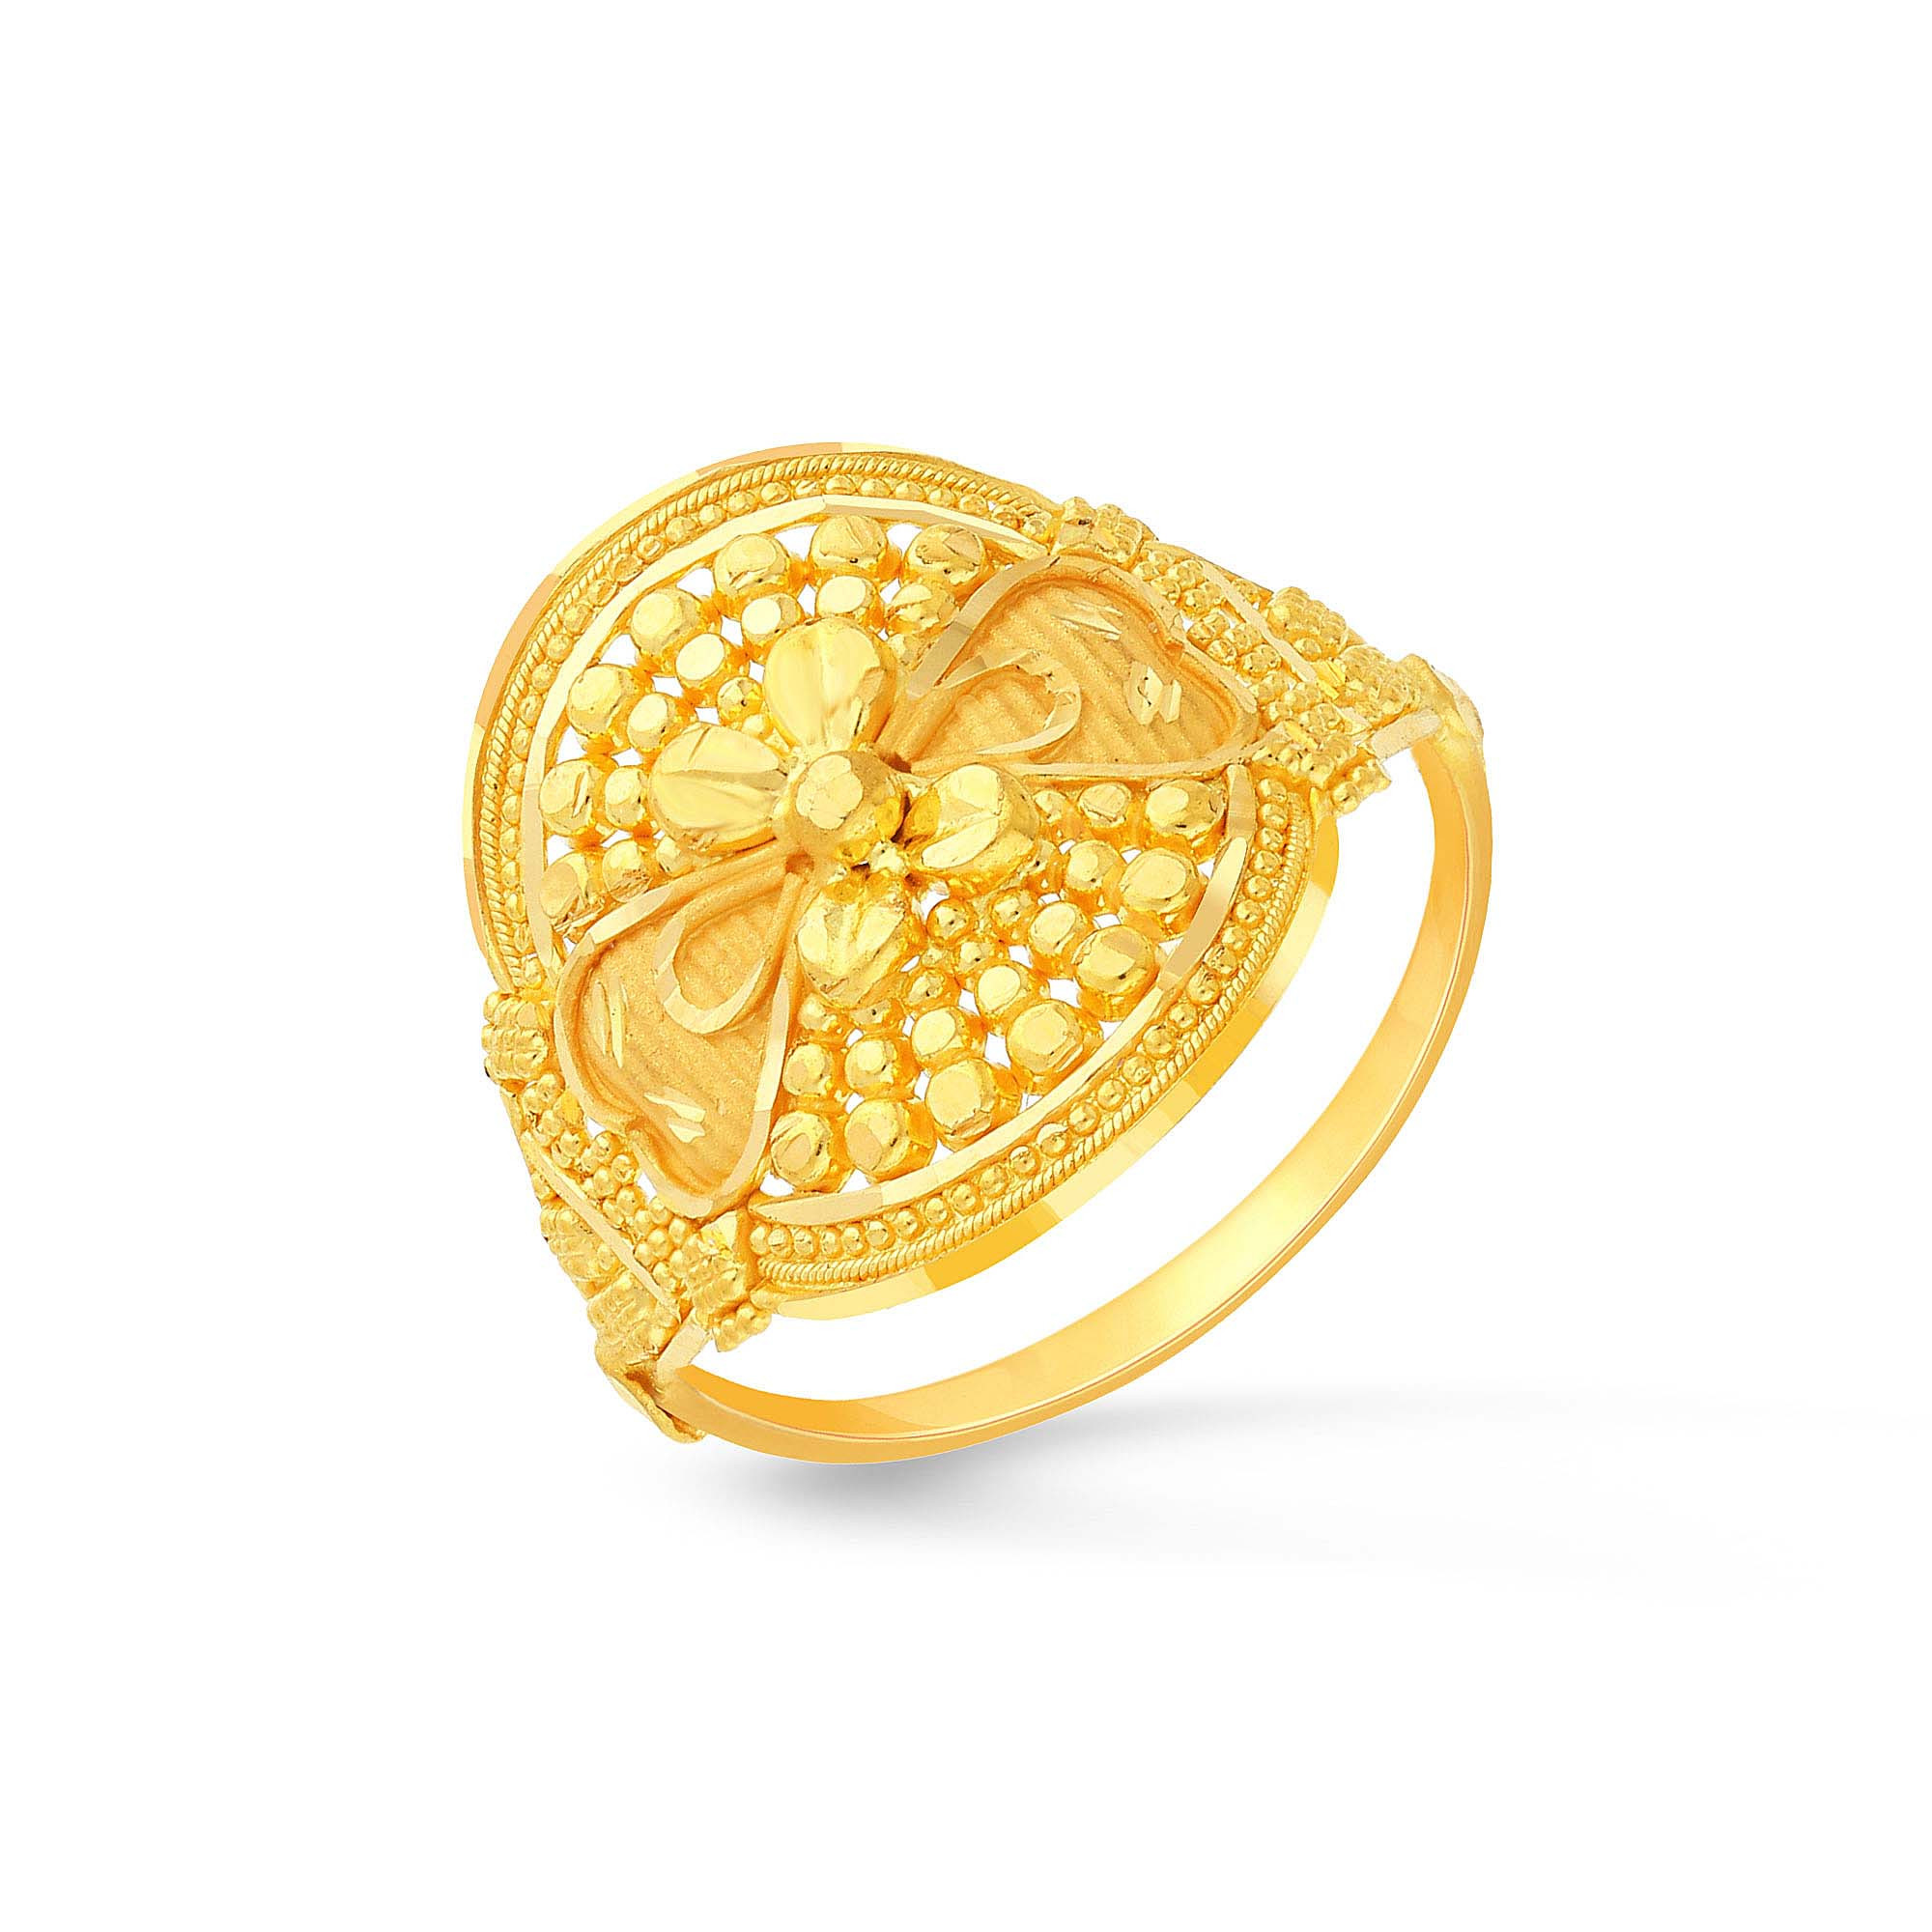 Latest Lightweight 22k Gold Ring Designs with Weight and Price 2022 |  Latest Lightweight 22k Gold Ring Designs with Weight and Price 2022 # goldring #fingerring #lightweightgoldring #lifestylegold #goldRings... | By  Lifestyle goldFacebook